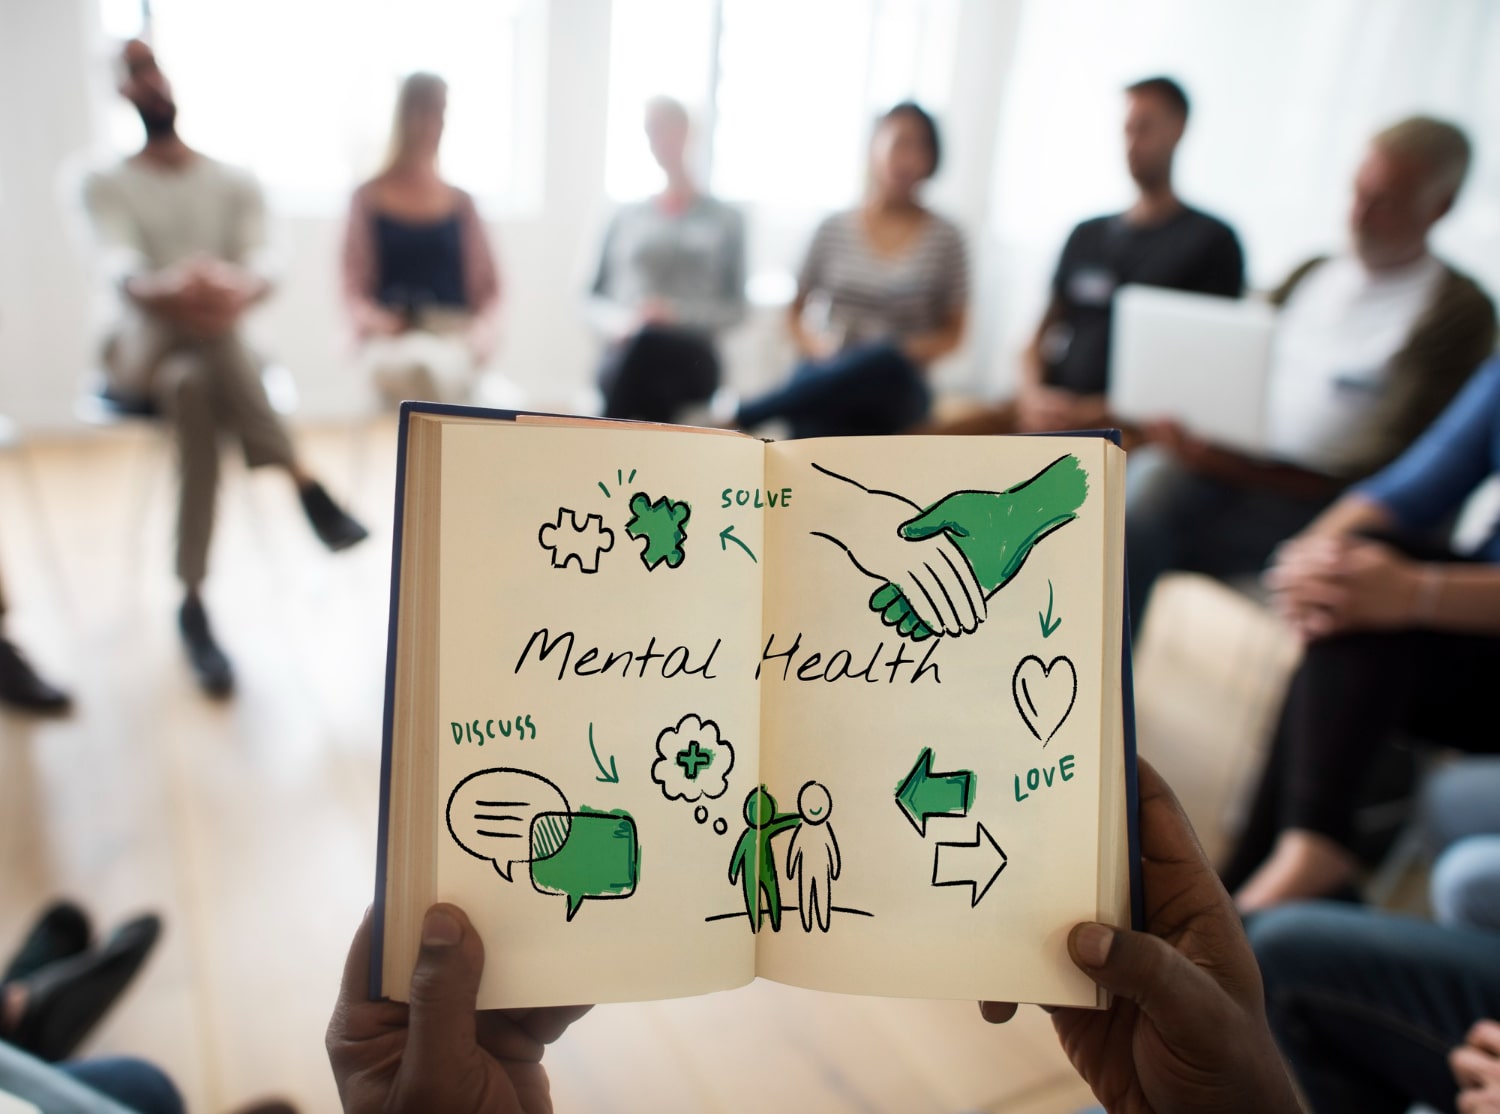 35 interesting facts about mental health